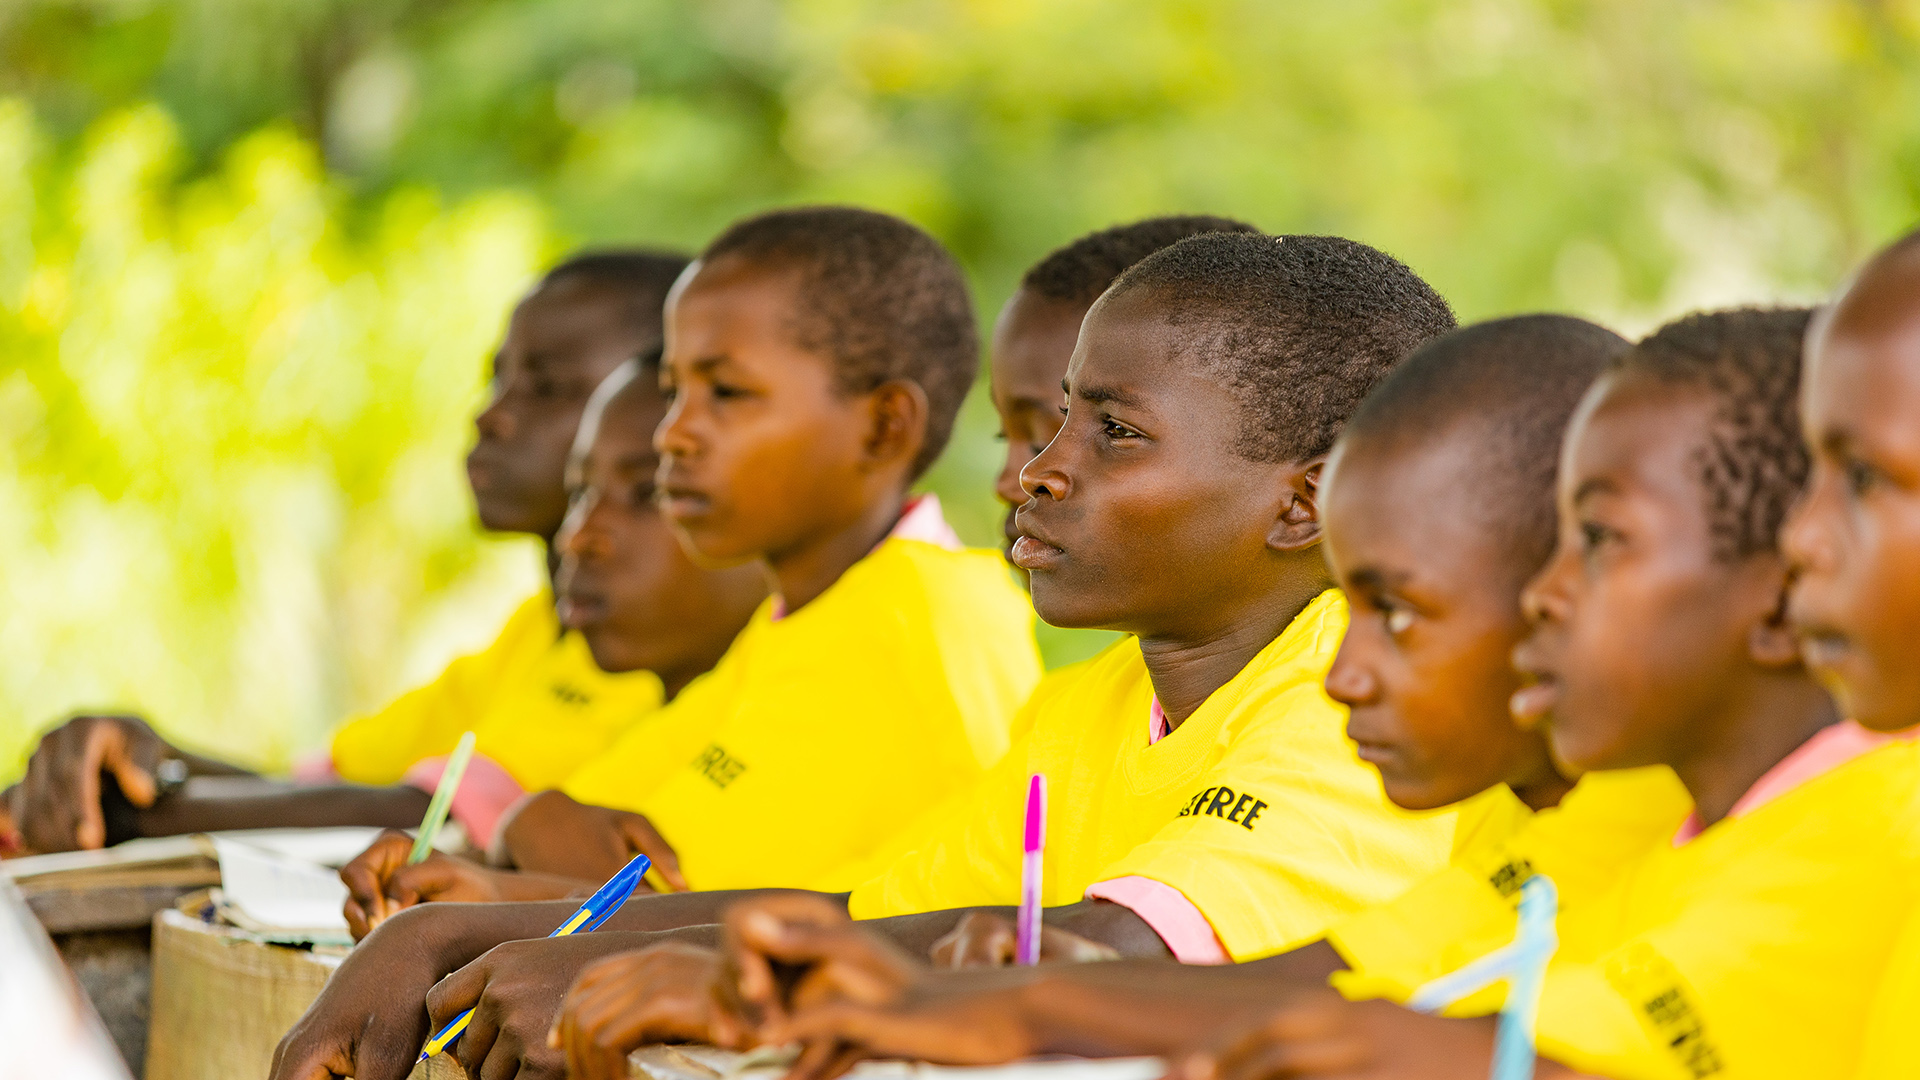 A row of Kenyan school children are sitting at a desk in yellow t-shirts with the Born Free logo